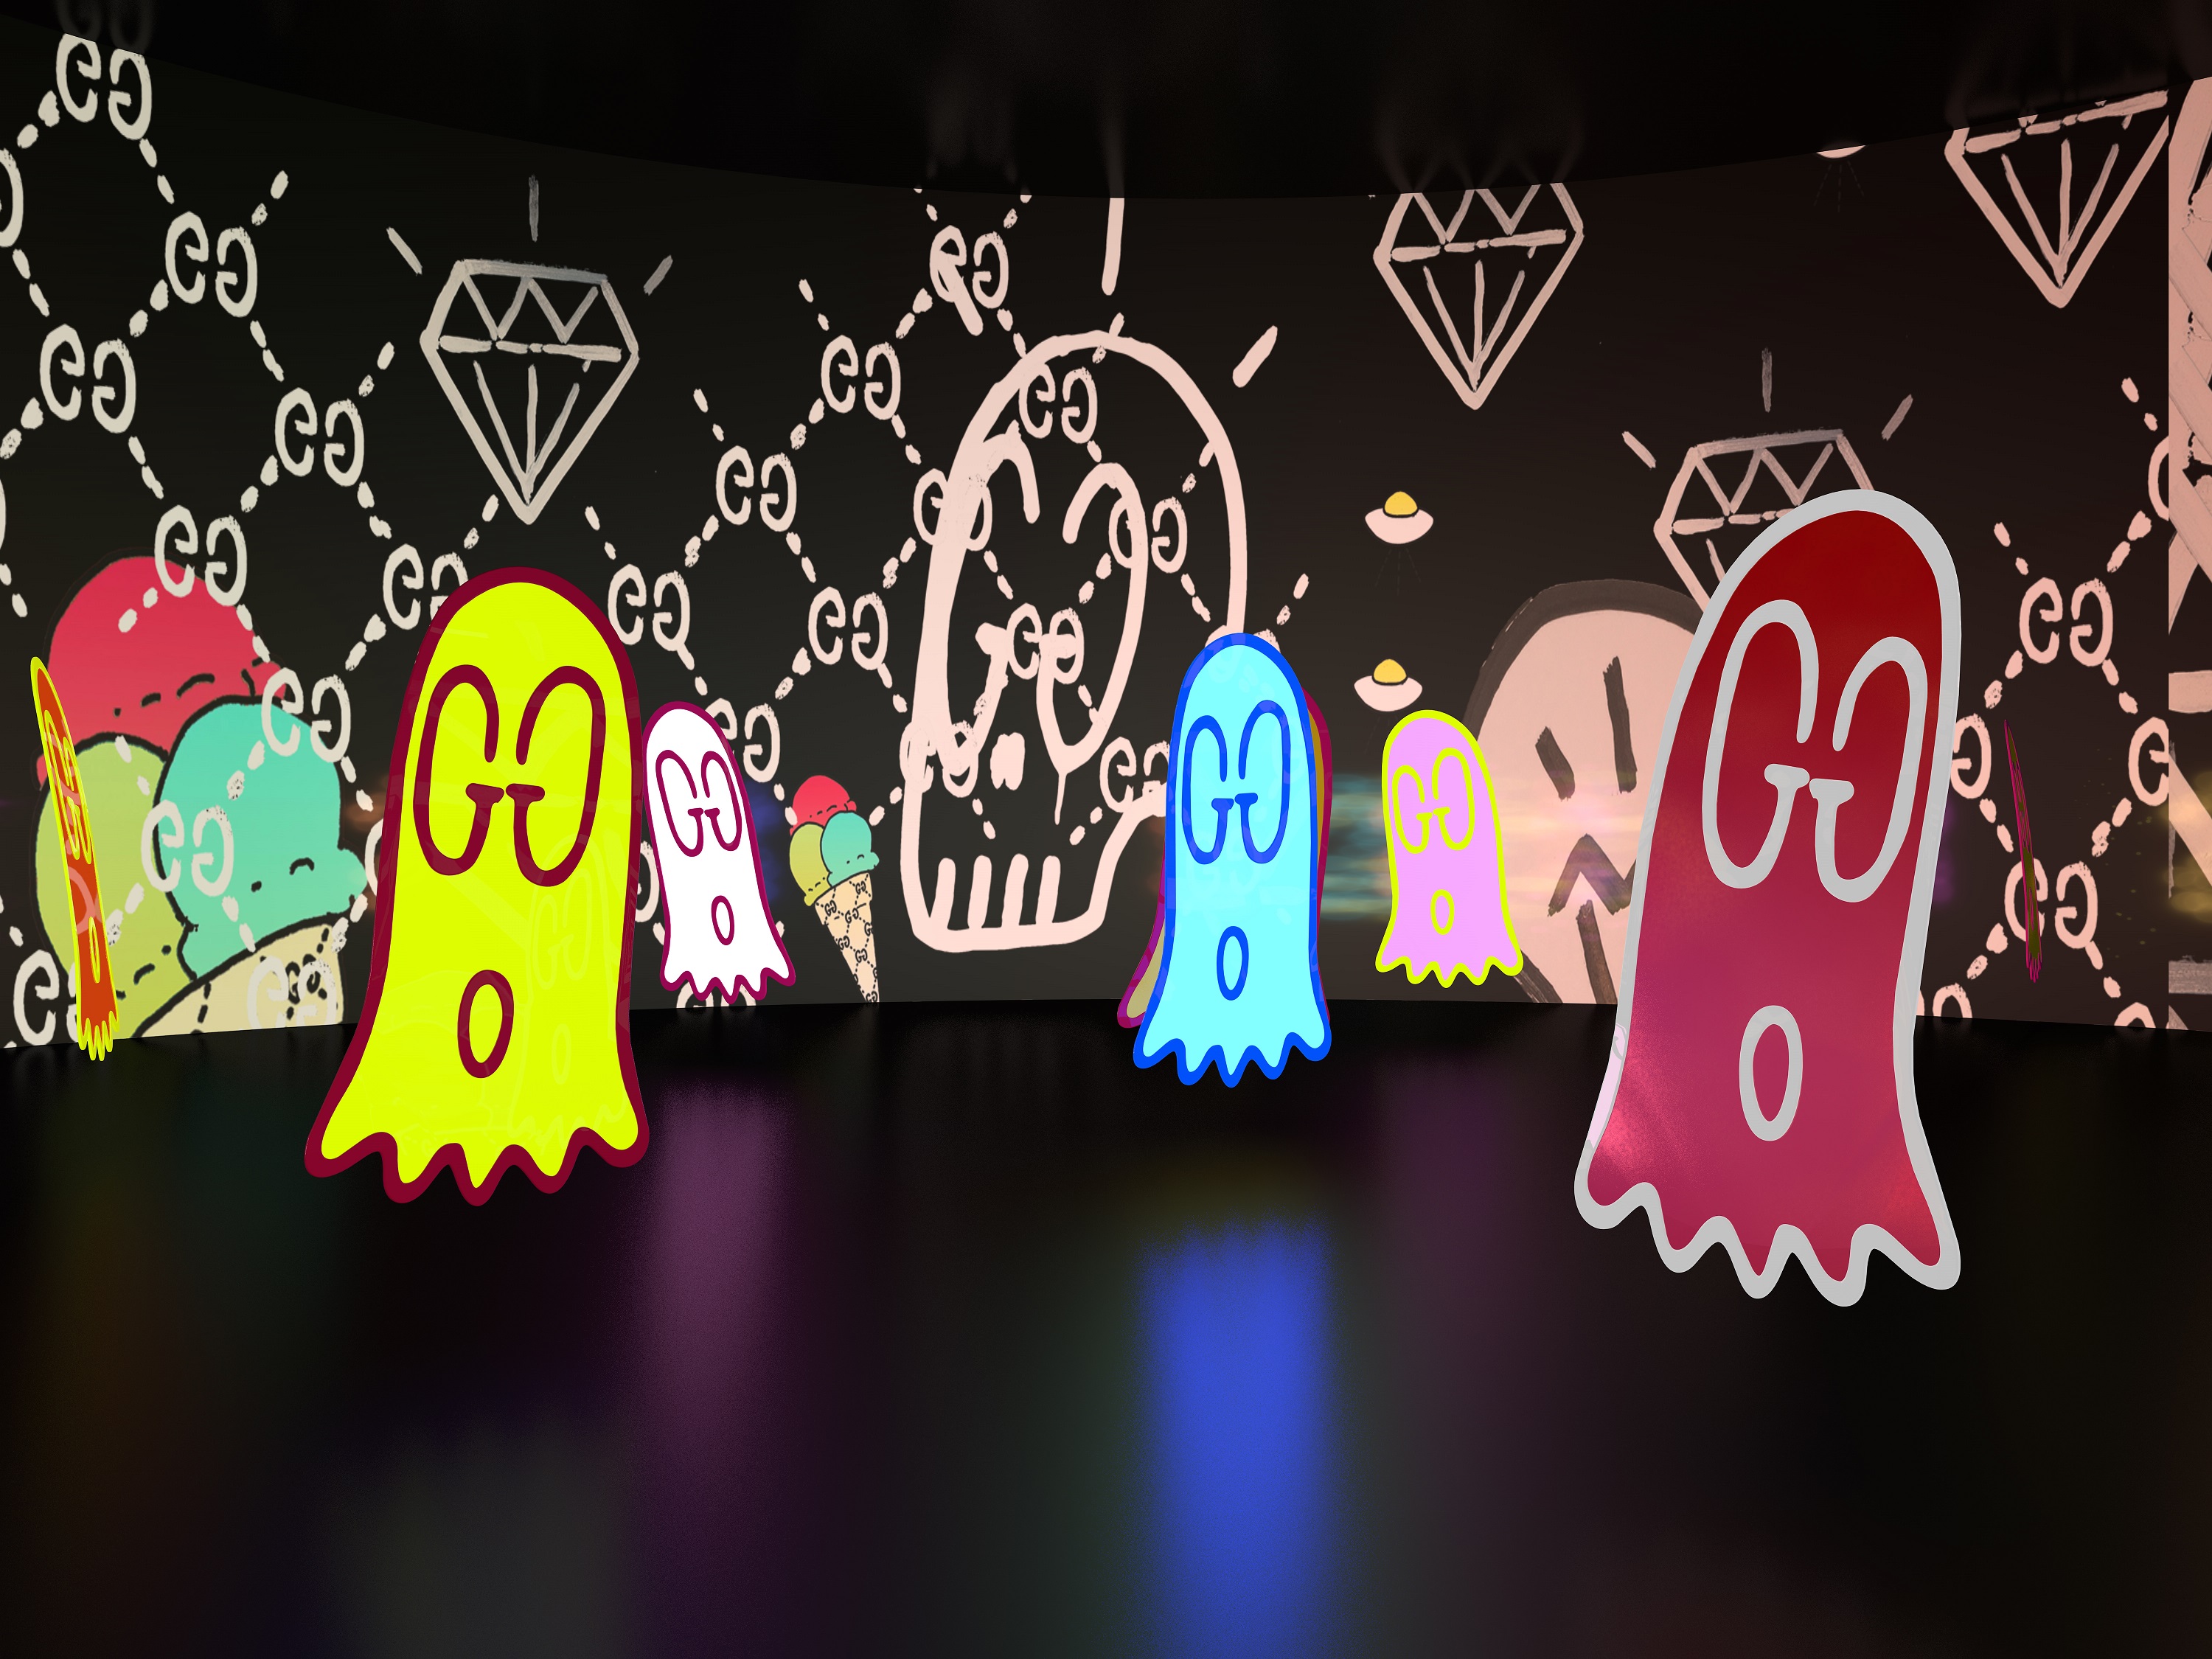 GucciGhost_Room__GucciGhost_虛擬實境展廳__藝術家_Trouble_Andrew_作品.jpg